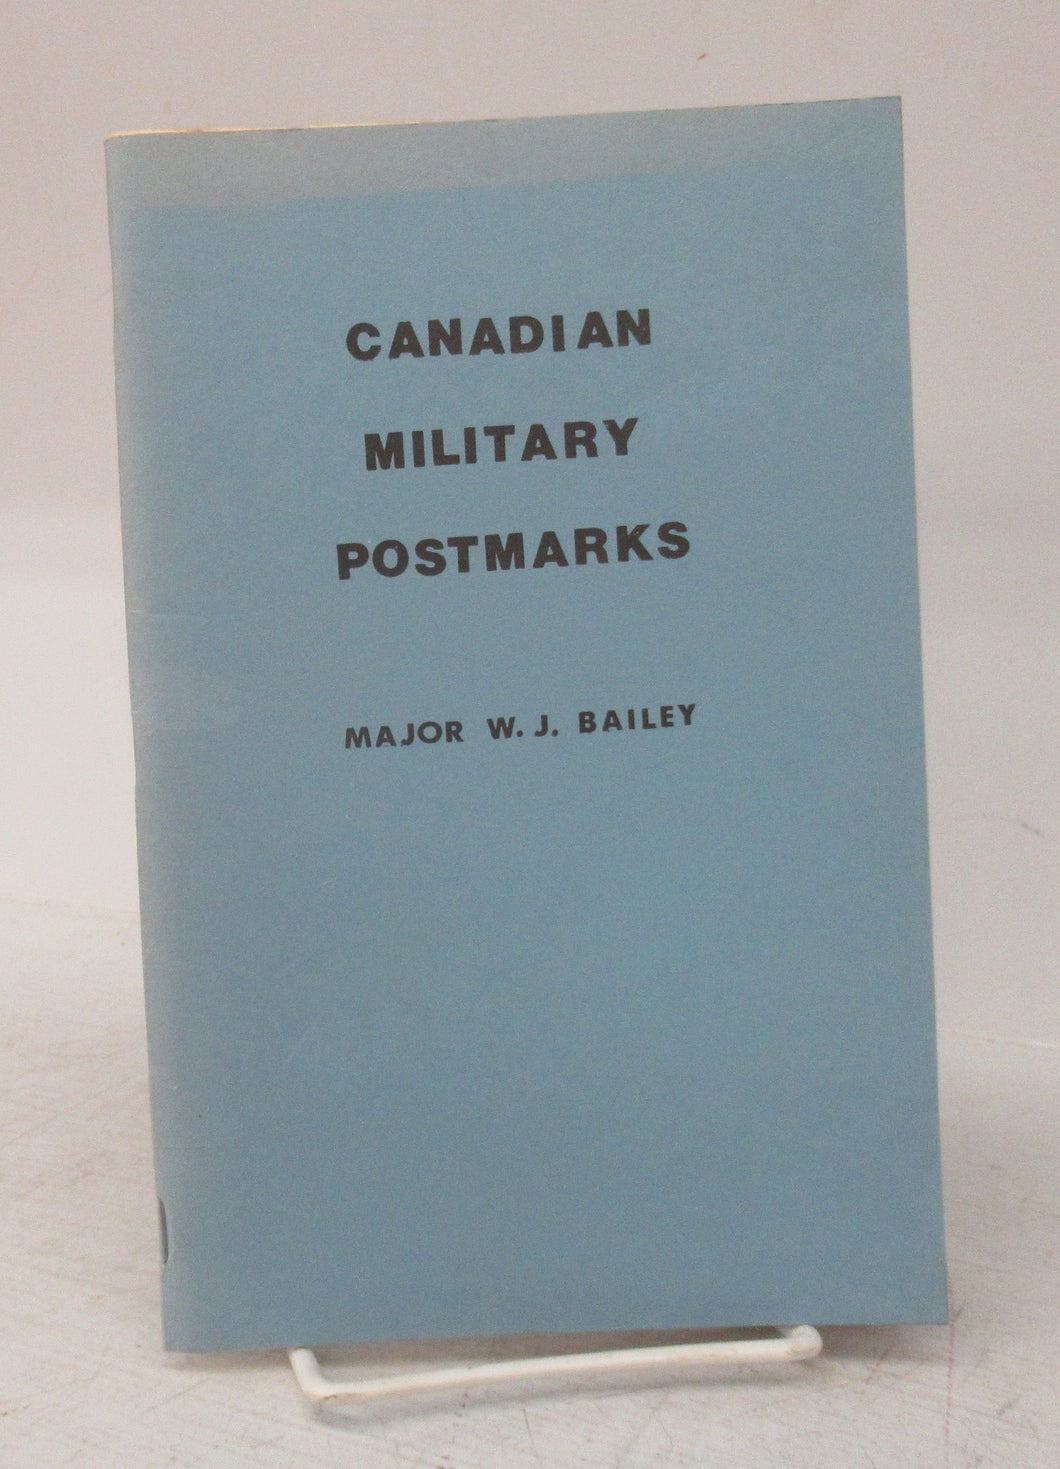 Canadian Military Postmarks